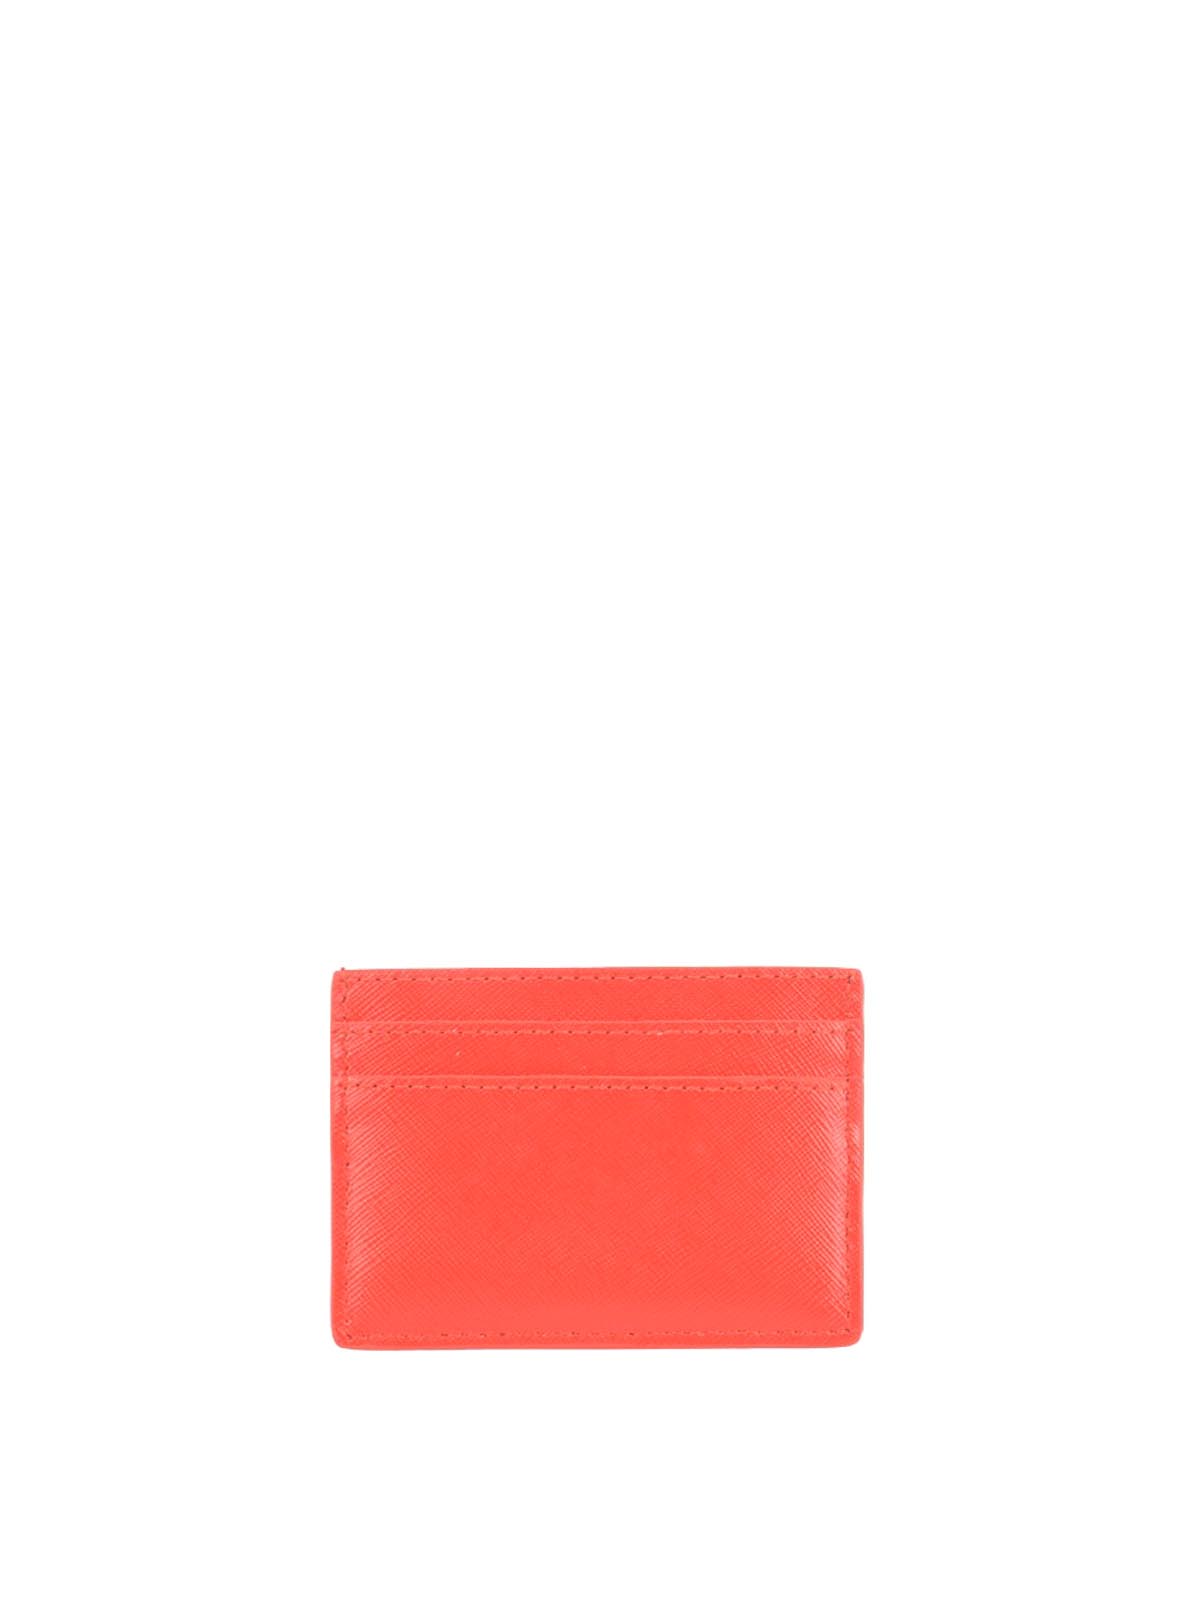 Marc Jacobs Logo Leather Card Case in Red